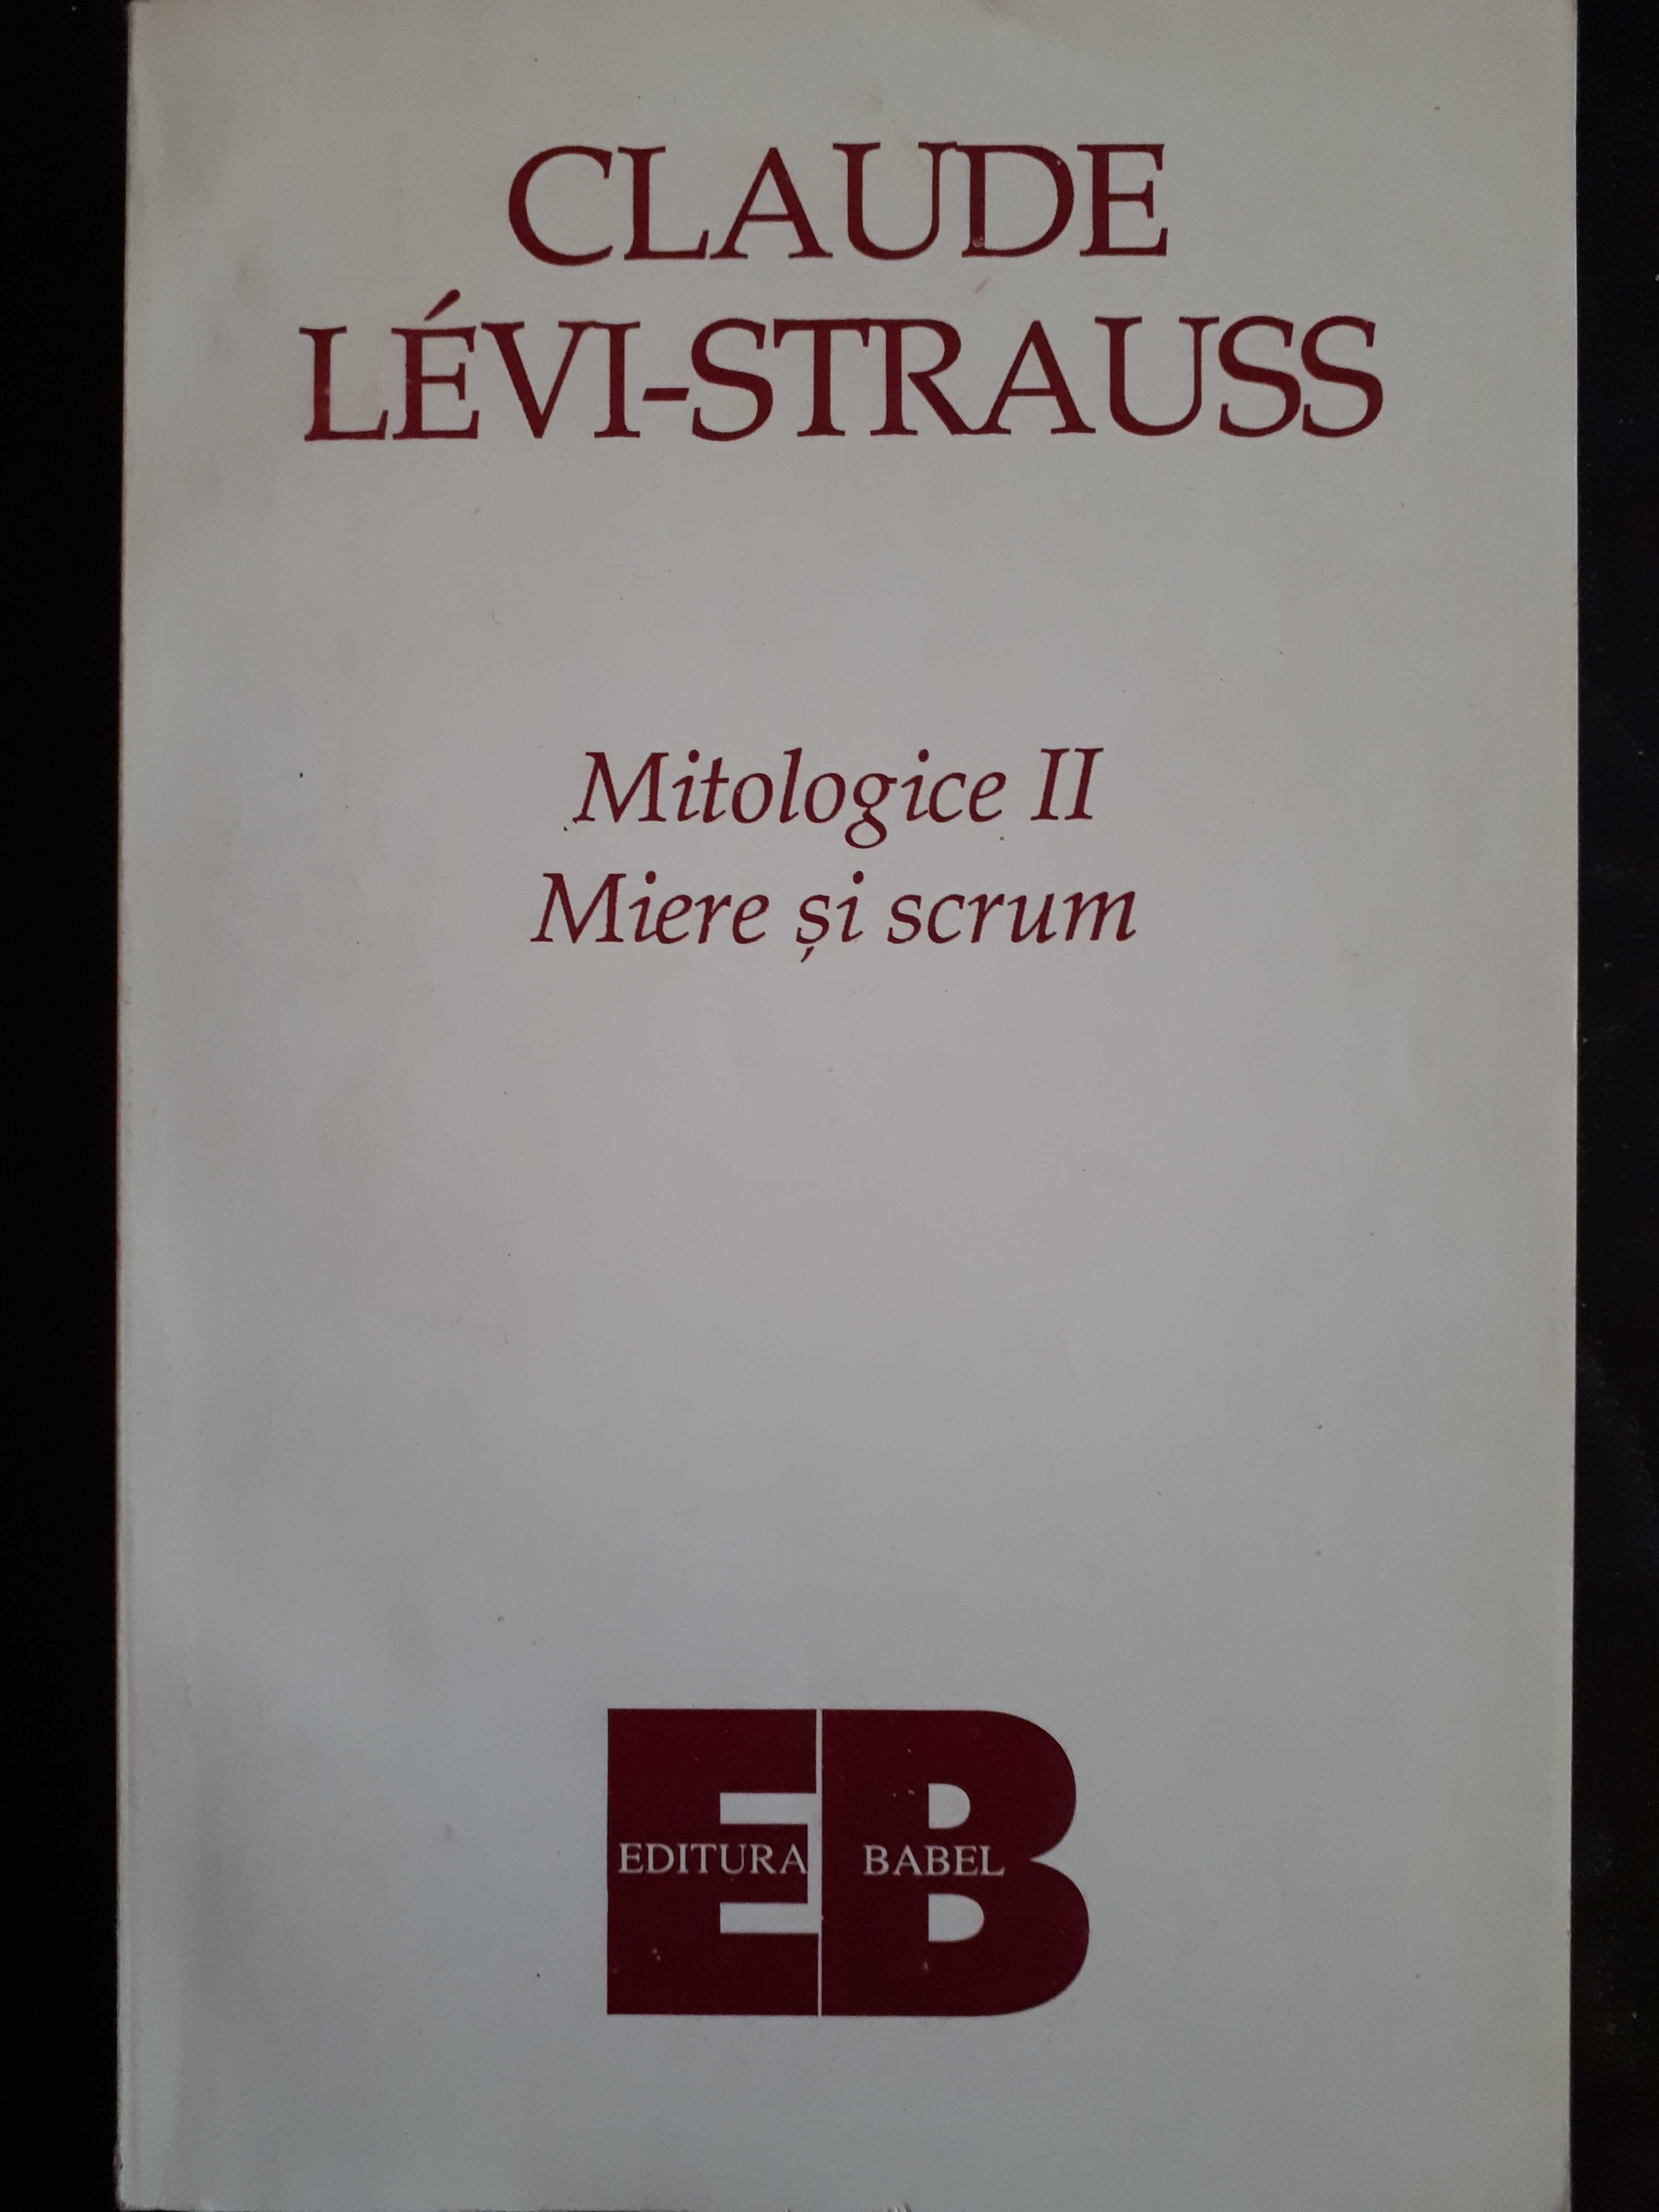 Claude Levi-Strauss, Mitologice II, Miere si scrum